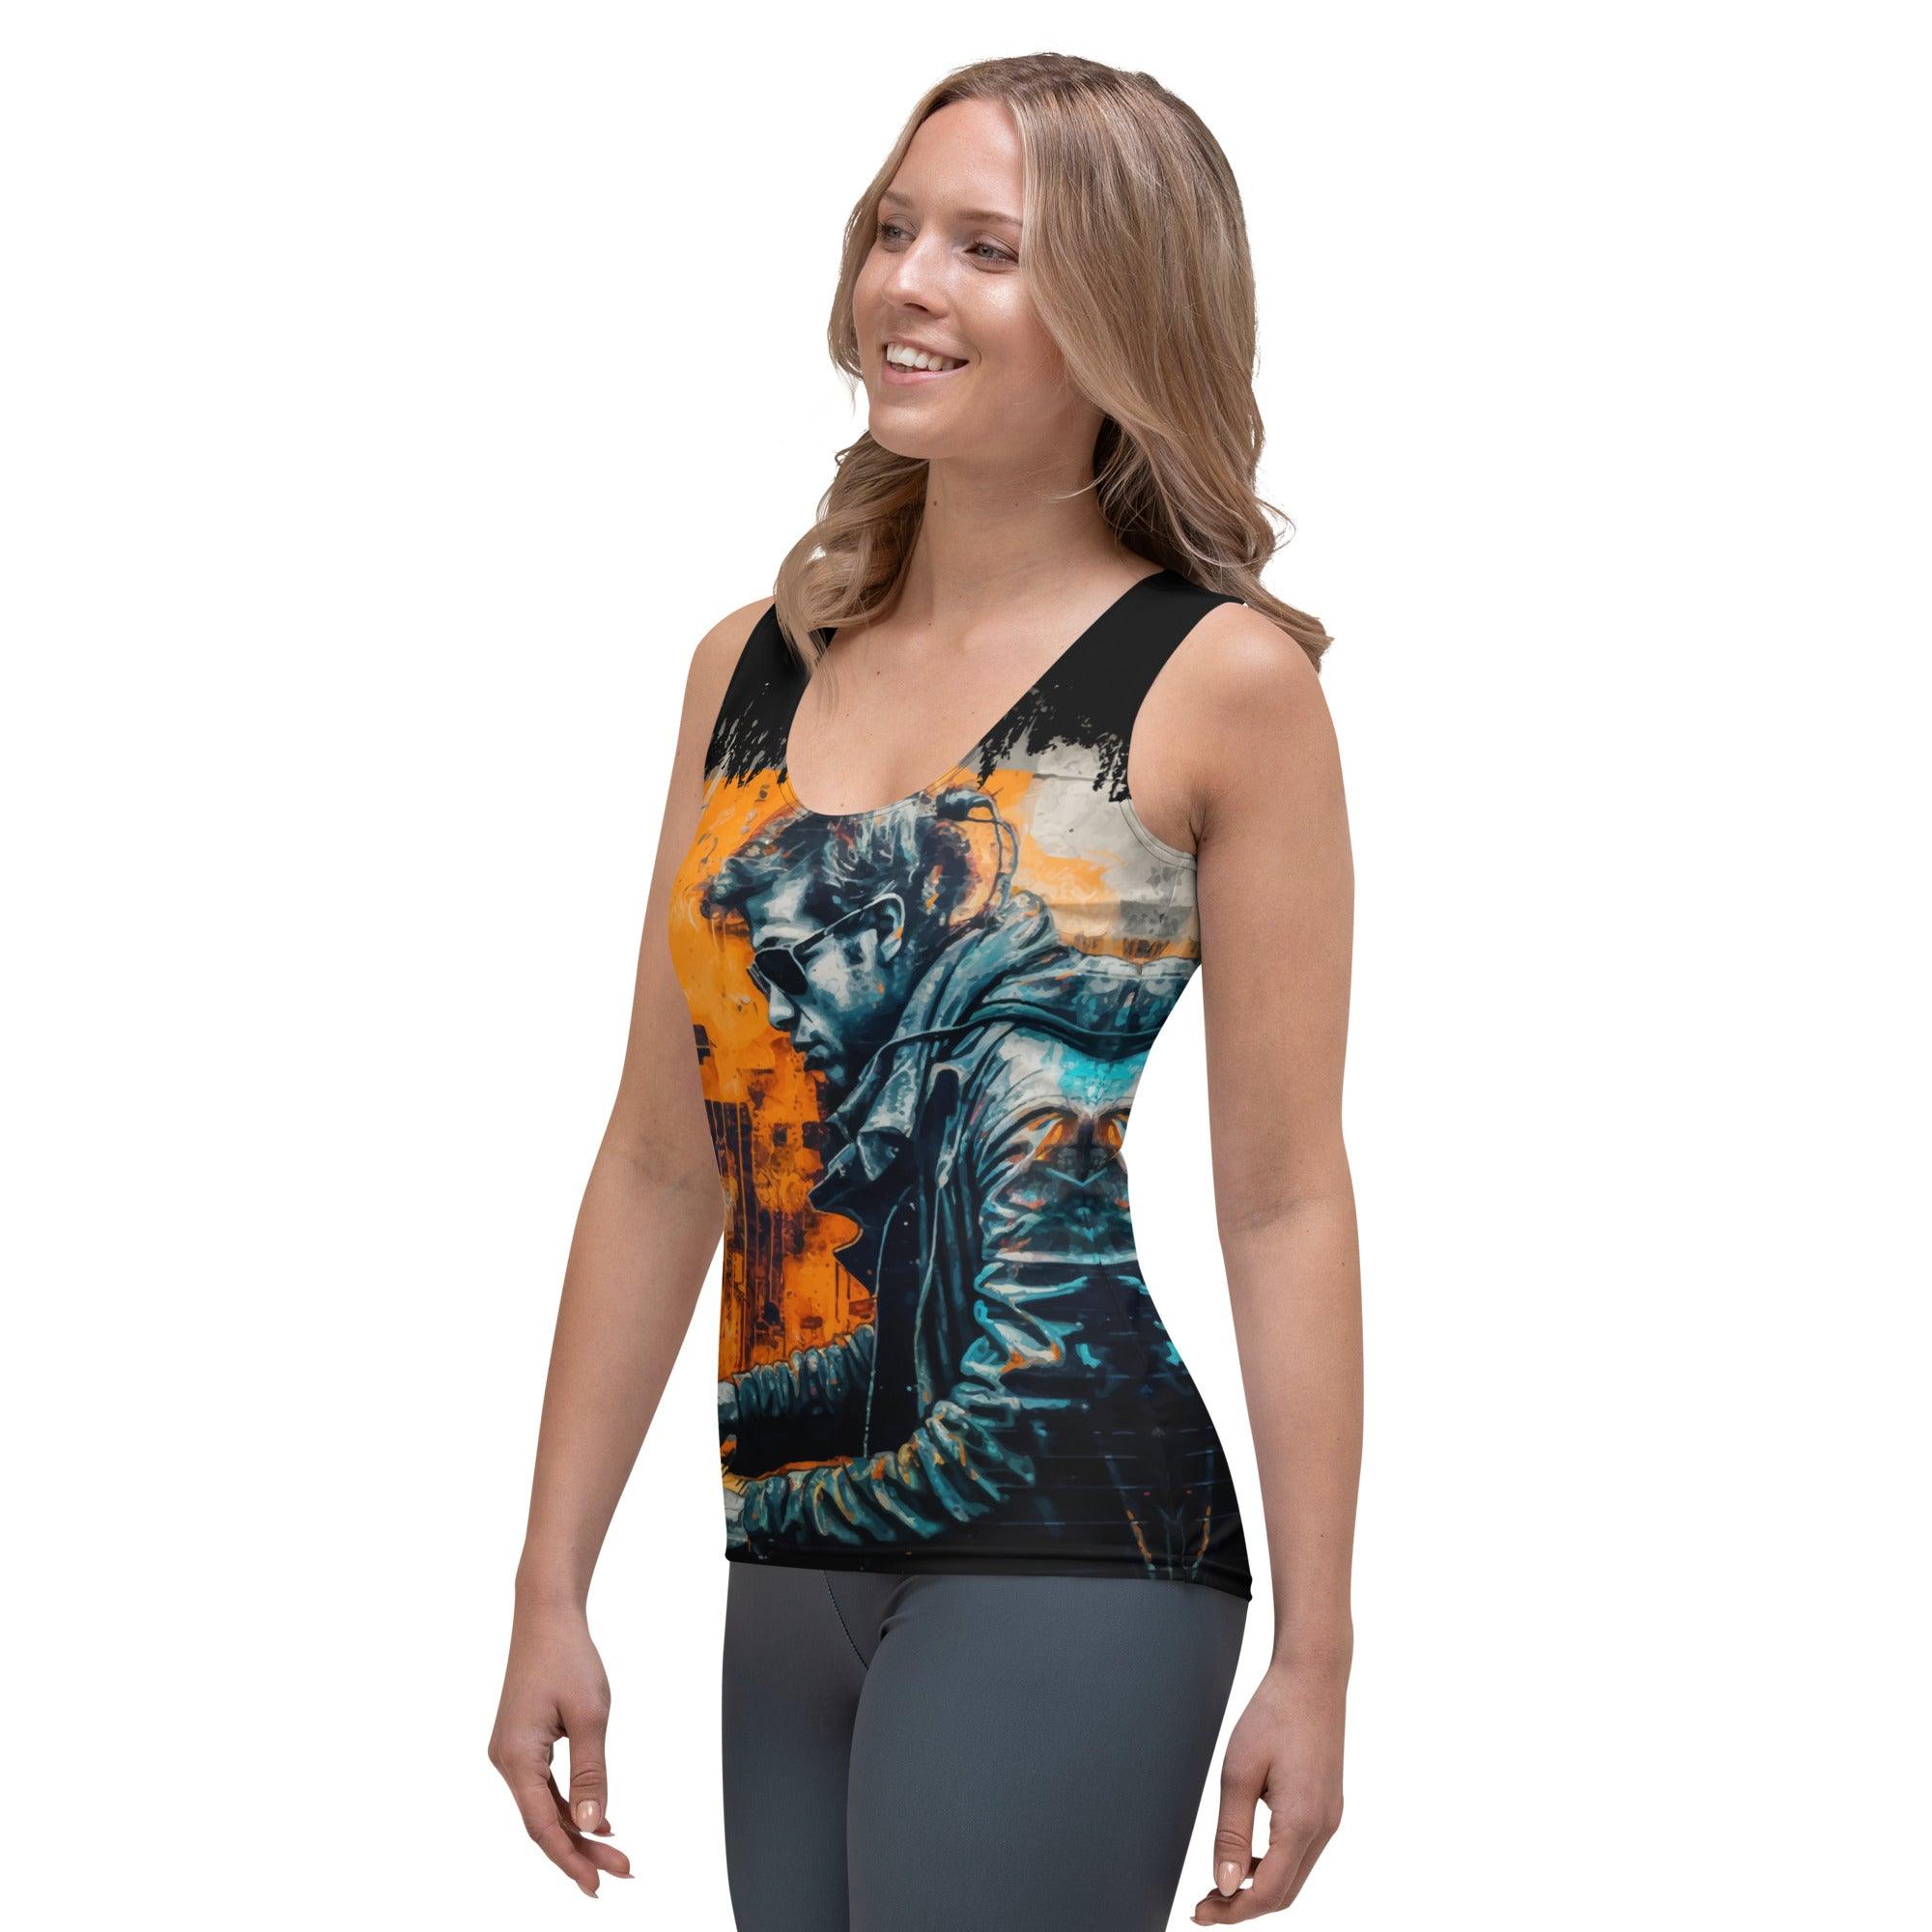 Keyboard Sorcery At Play Sublimation Cut & Sew Tank Top - Beyond T-shirts